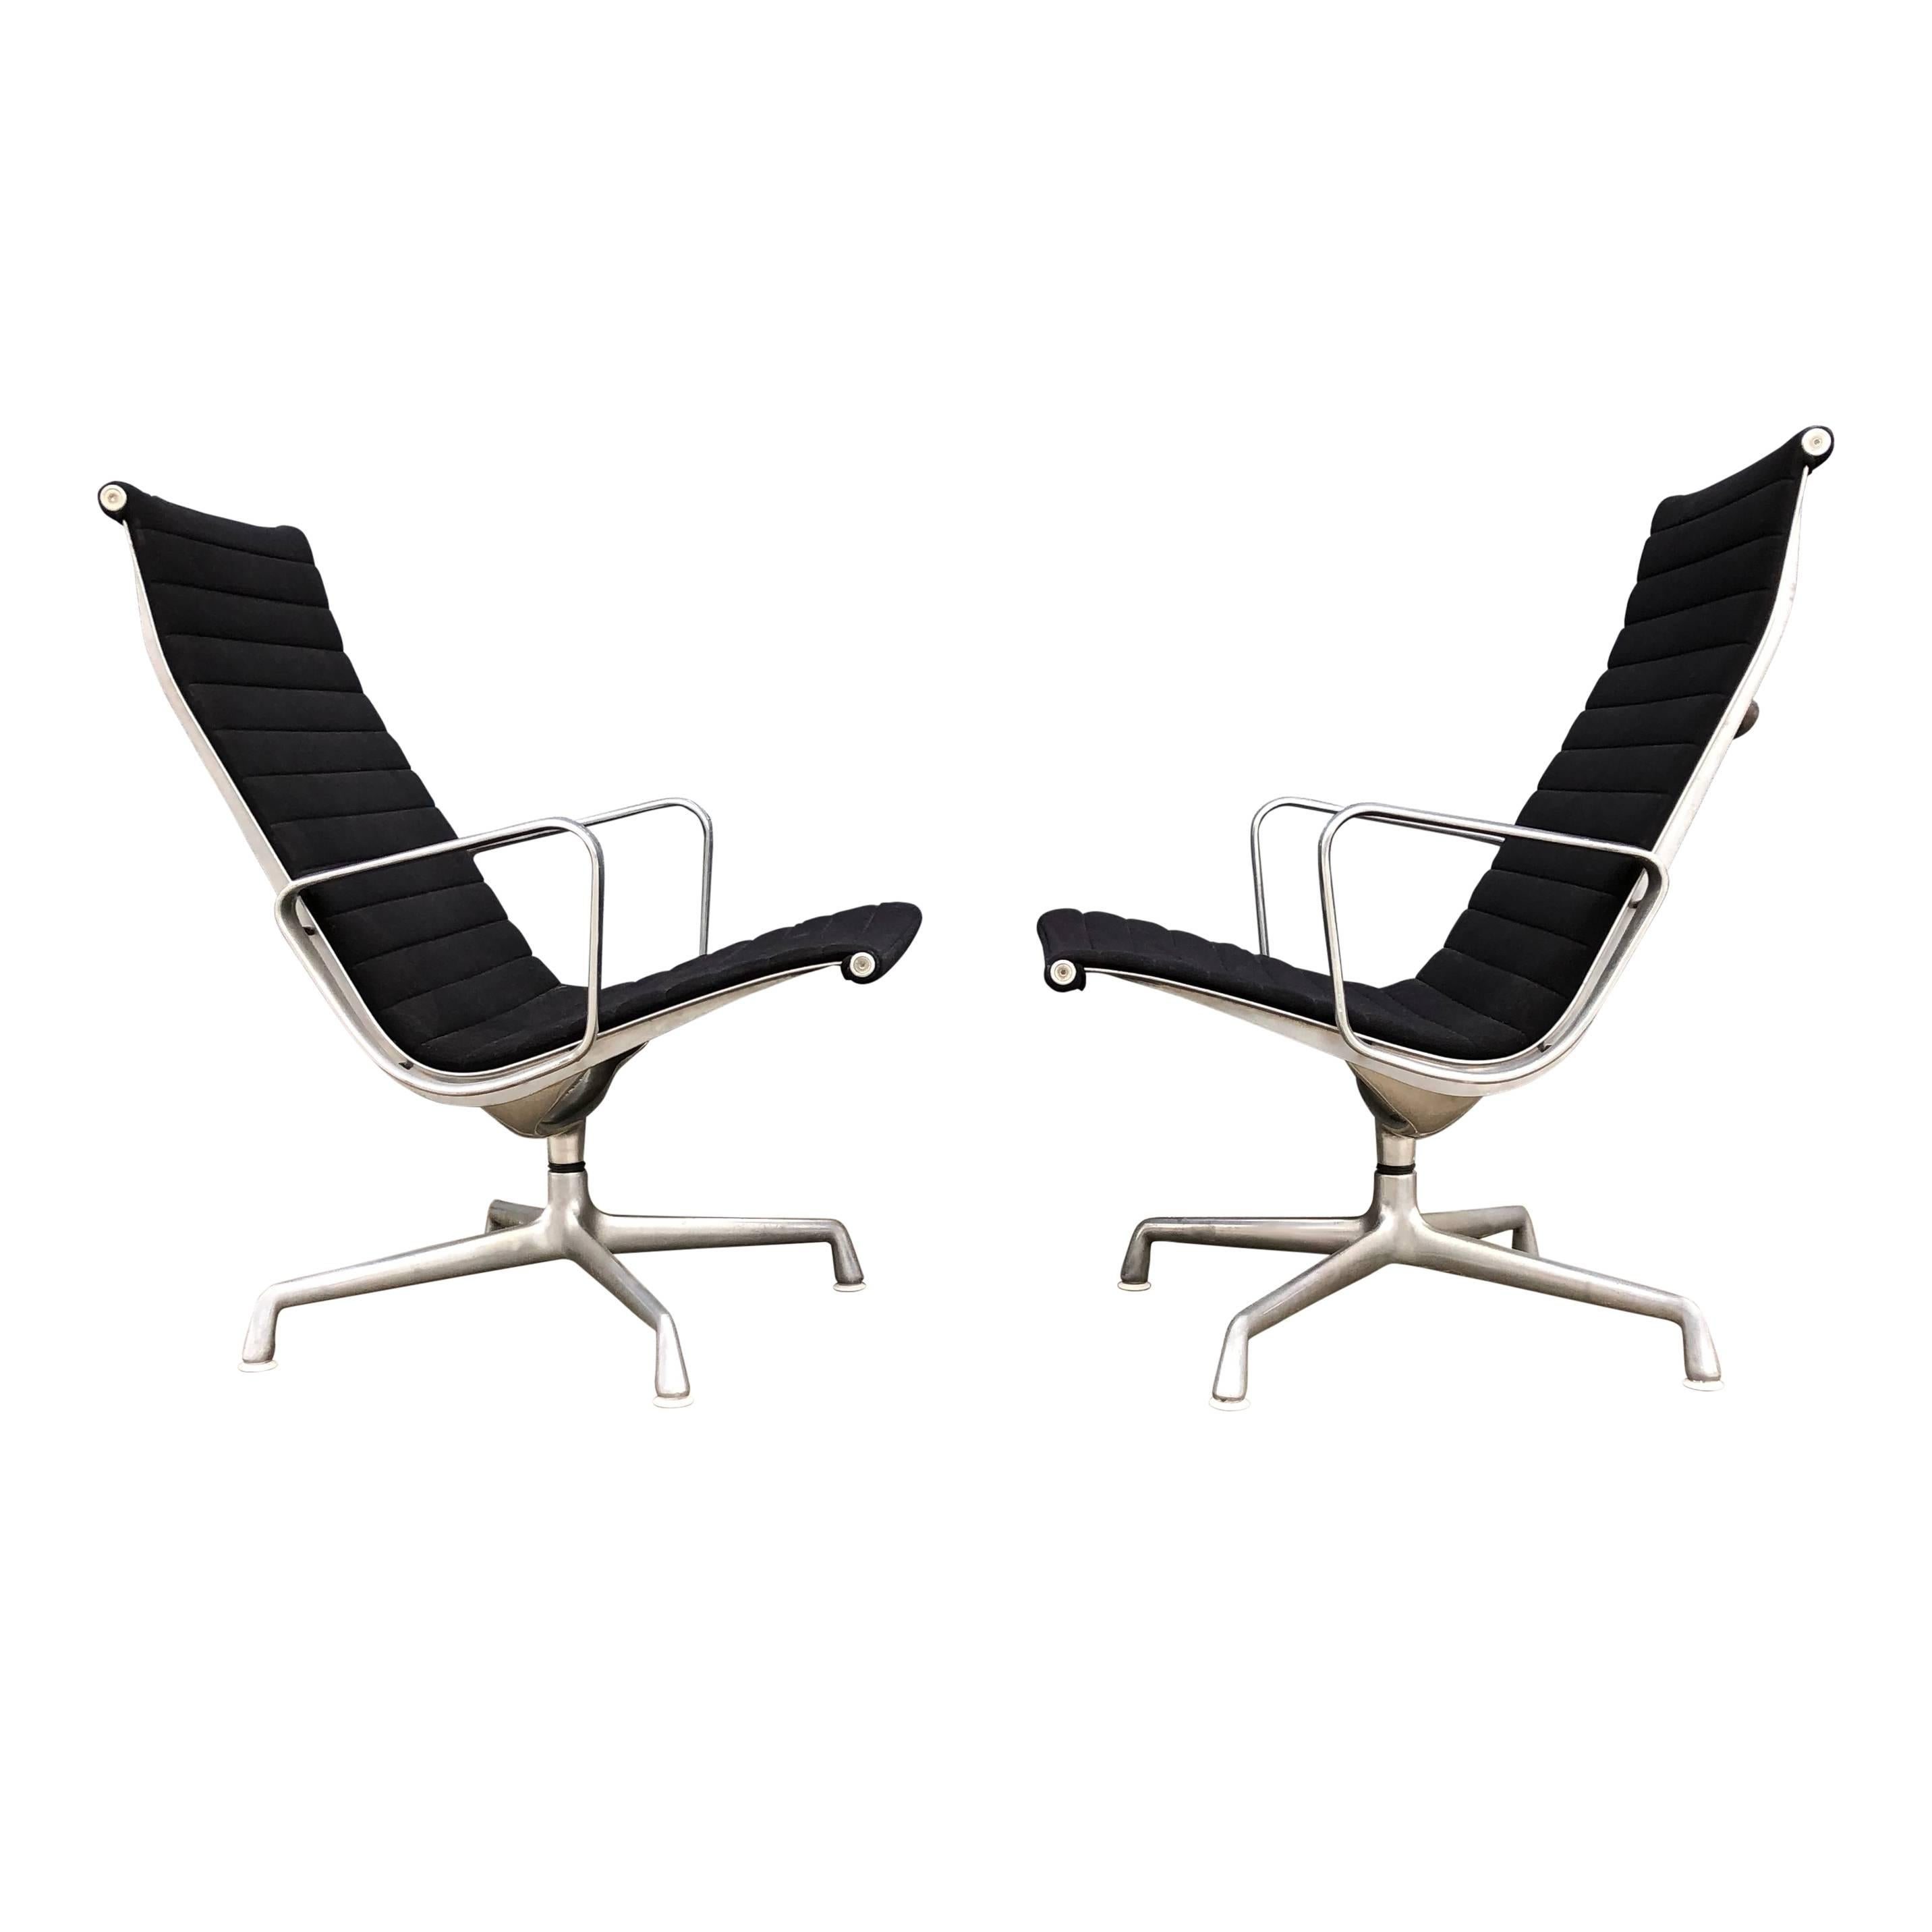 For your consideration are an original pair of Eames for Herman Miller aluminium group lounge chairs. Classics of Mid-Century Modern design.

Original black fabric upholstery is in nice vintage condition, though does show slight signs of